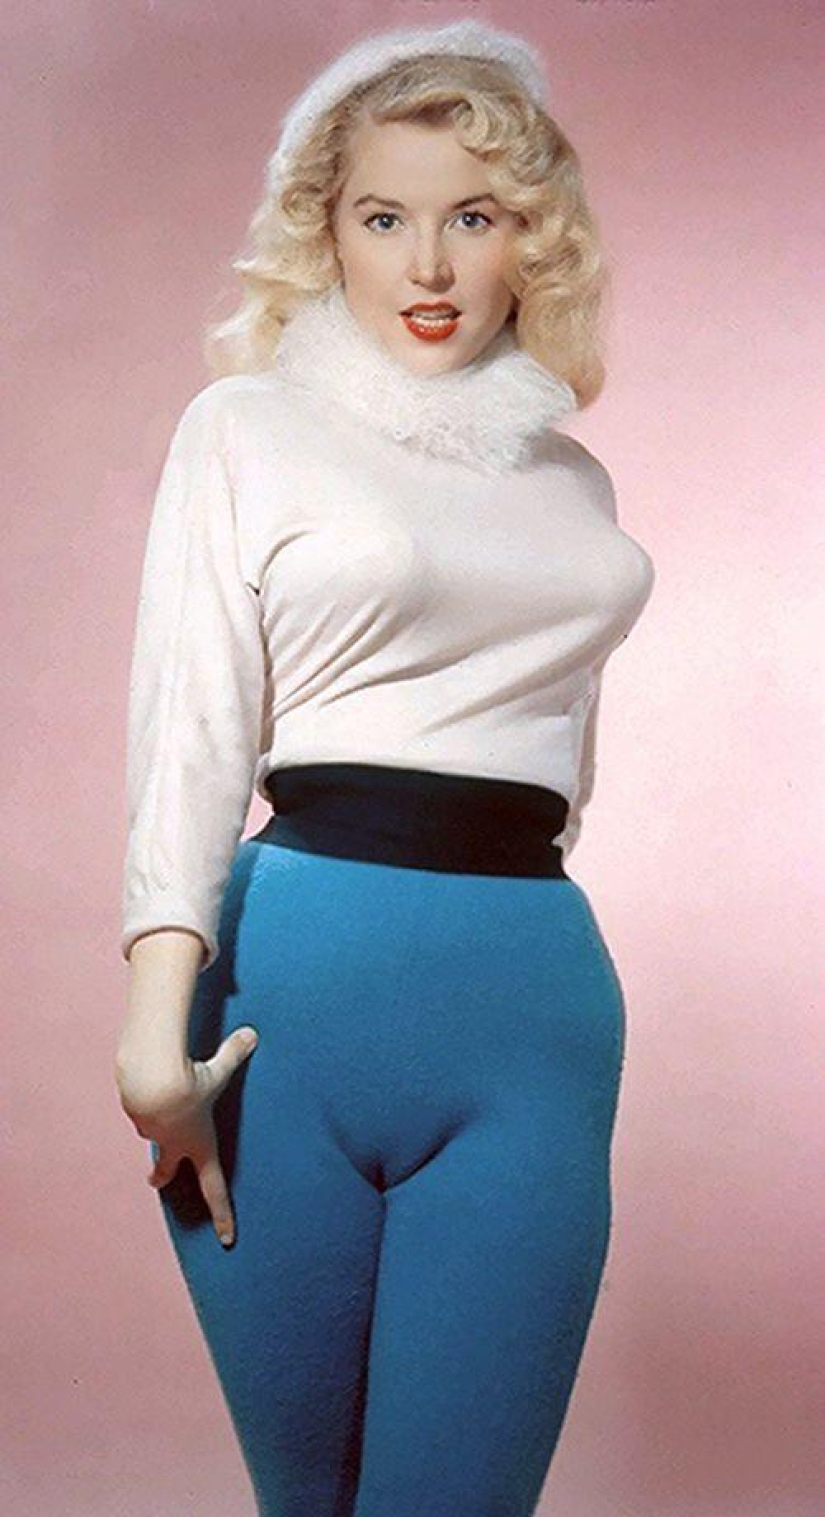 Betty Brosmer is the owner of the most gorgeous figure of the 50s